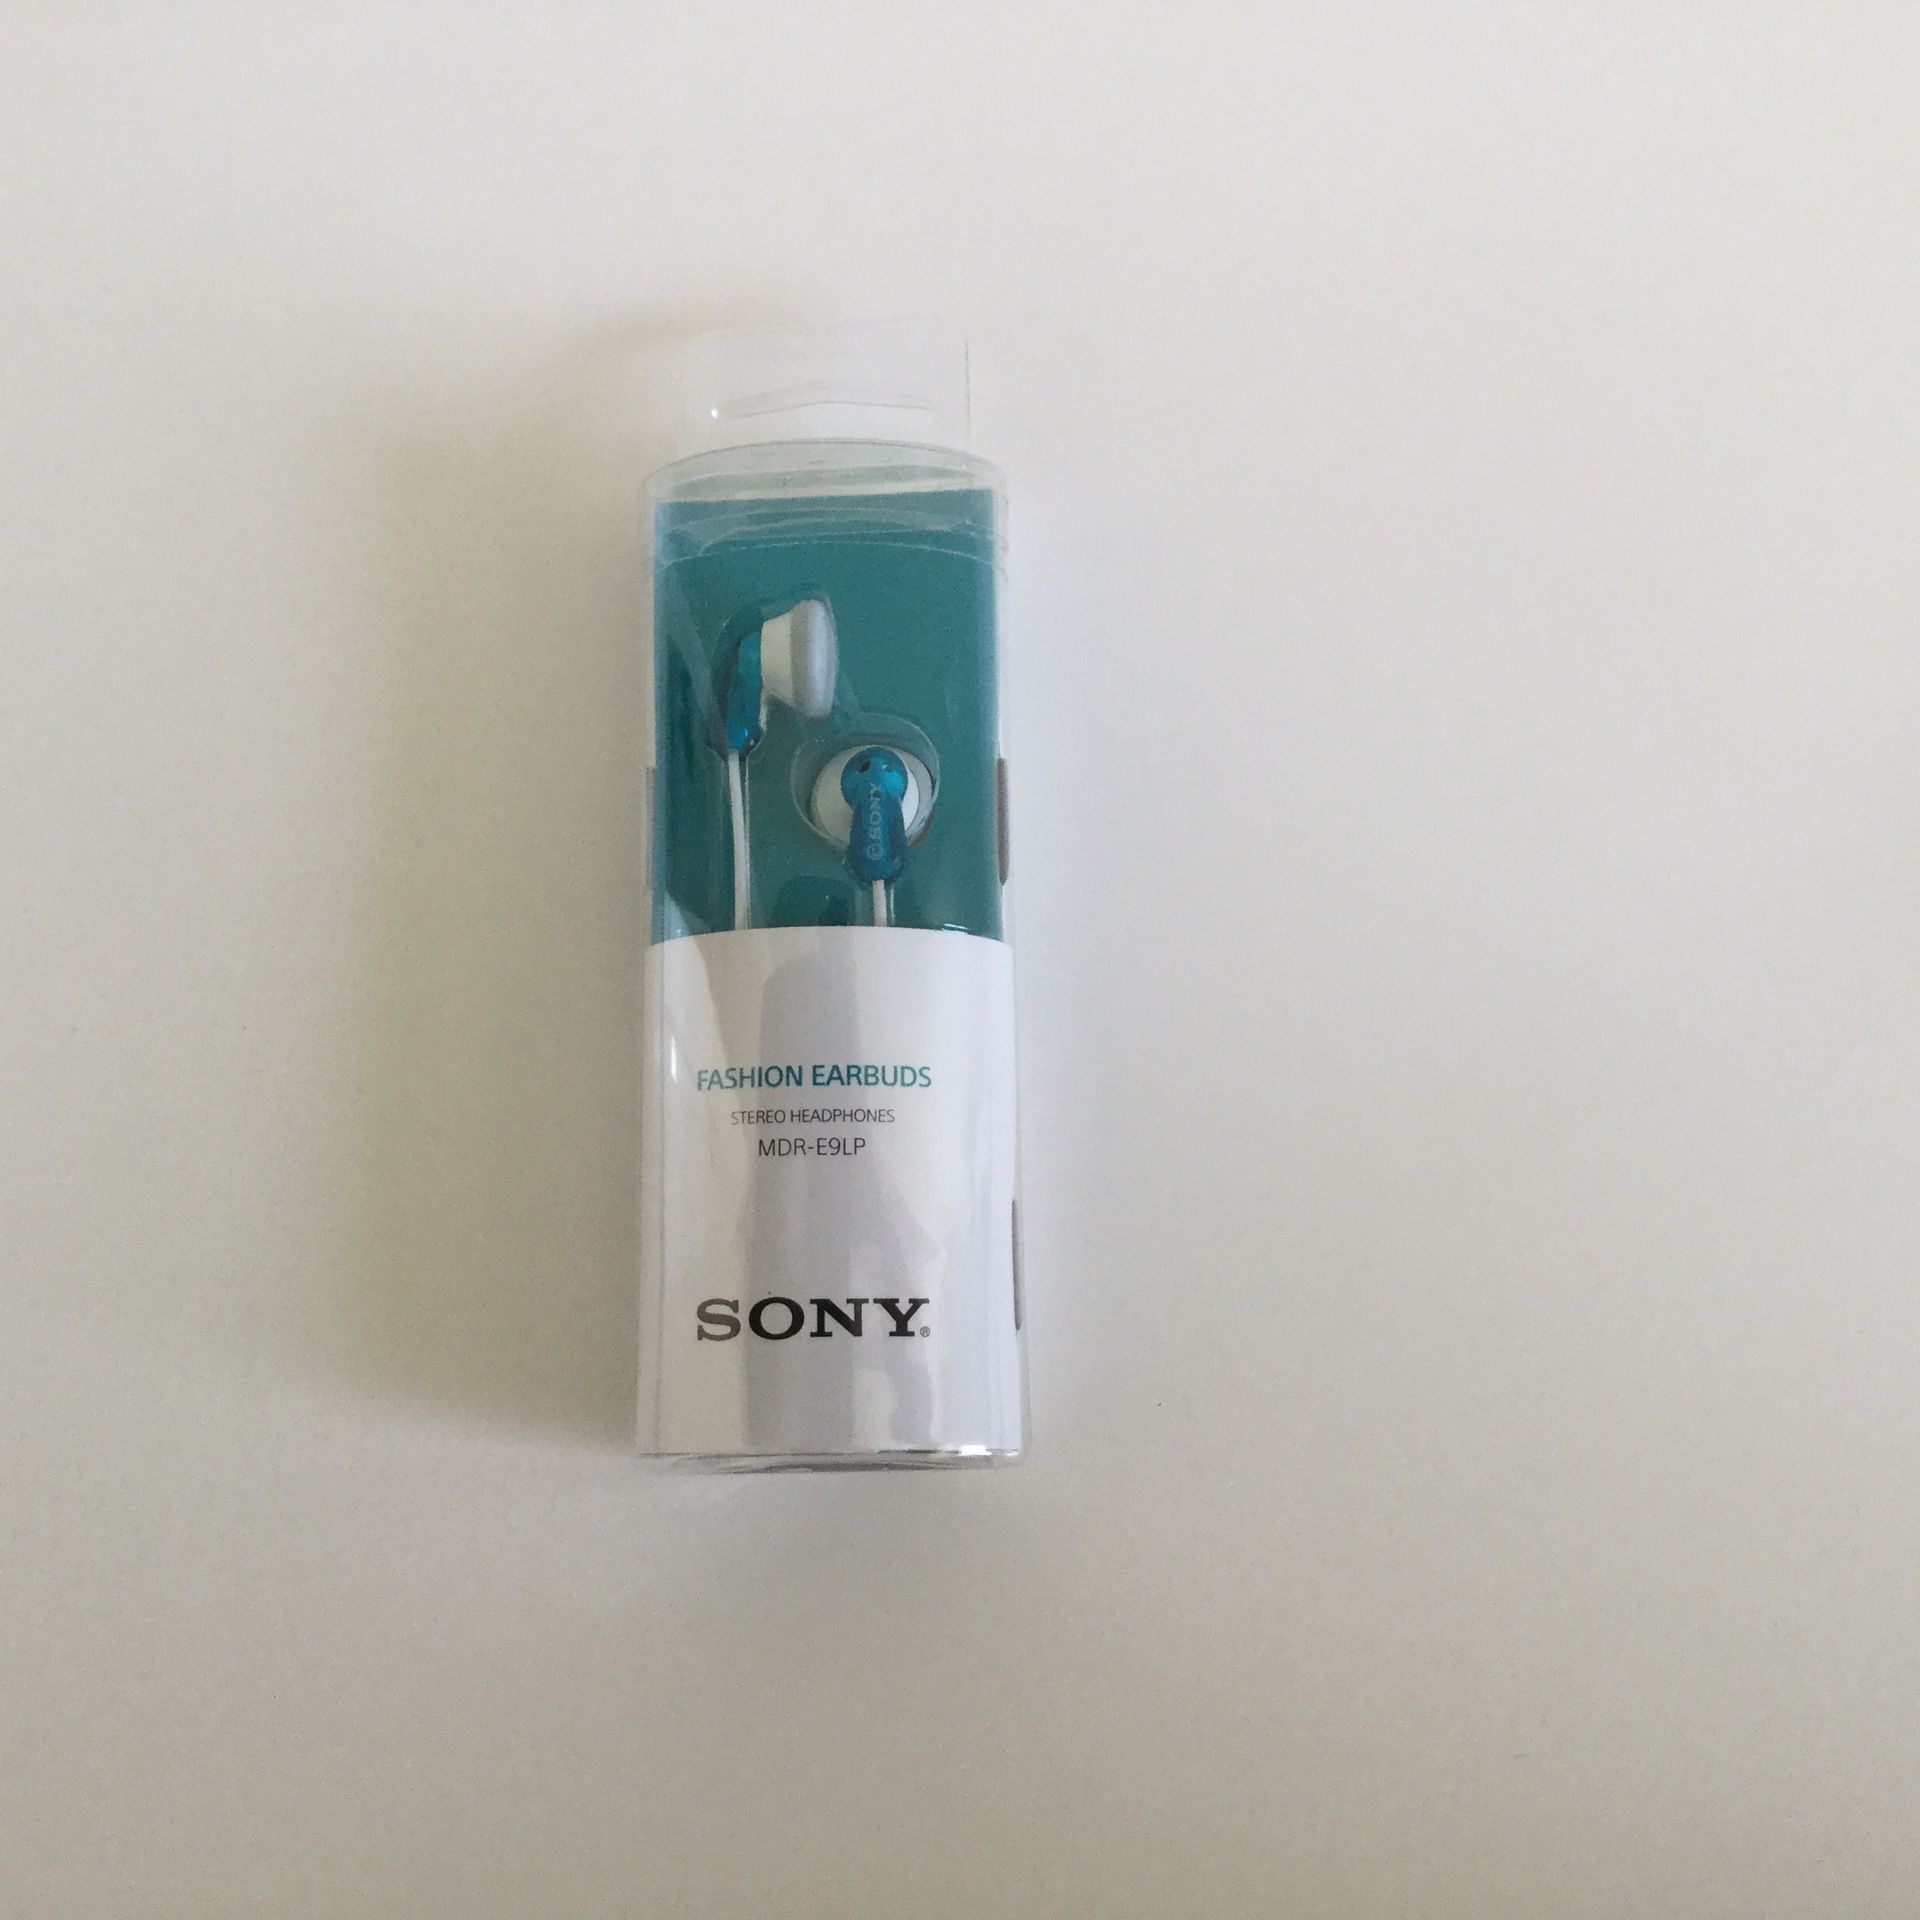 One Blue Sony Fashion Earbuds MDR-E9LP